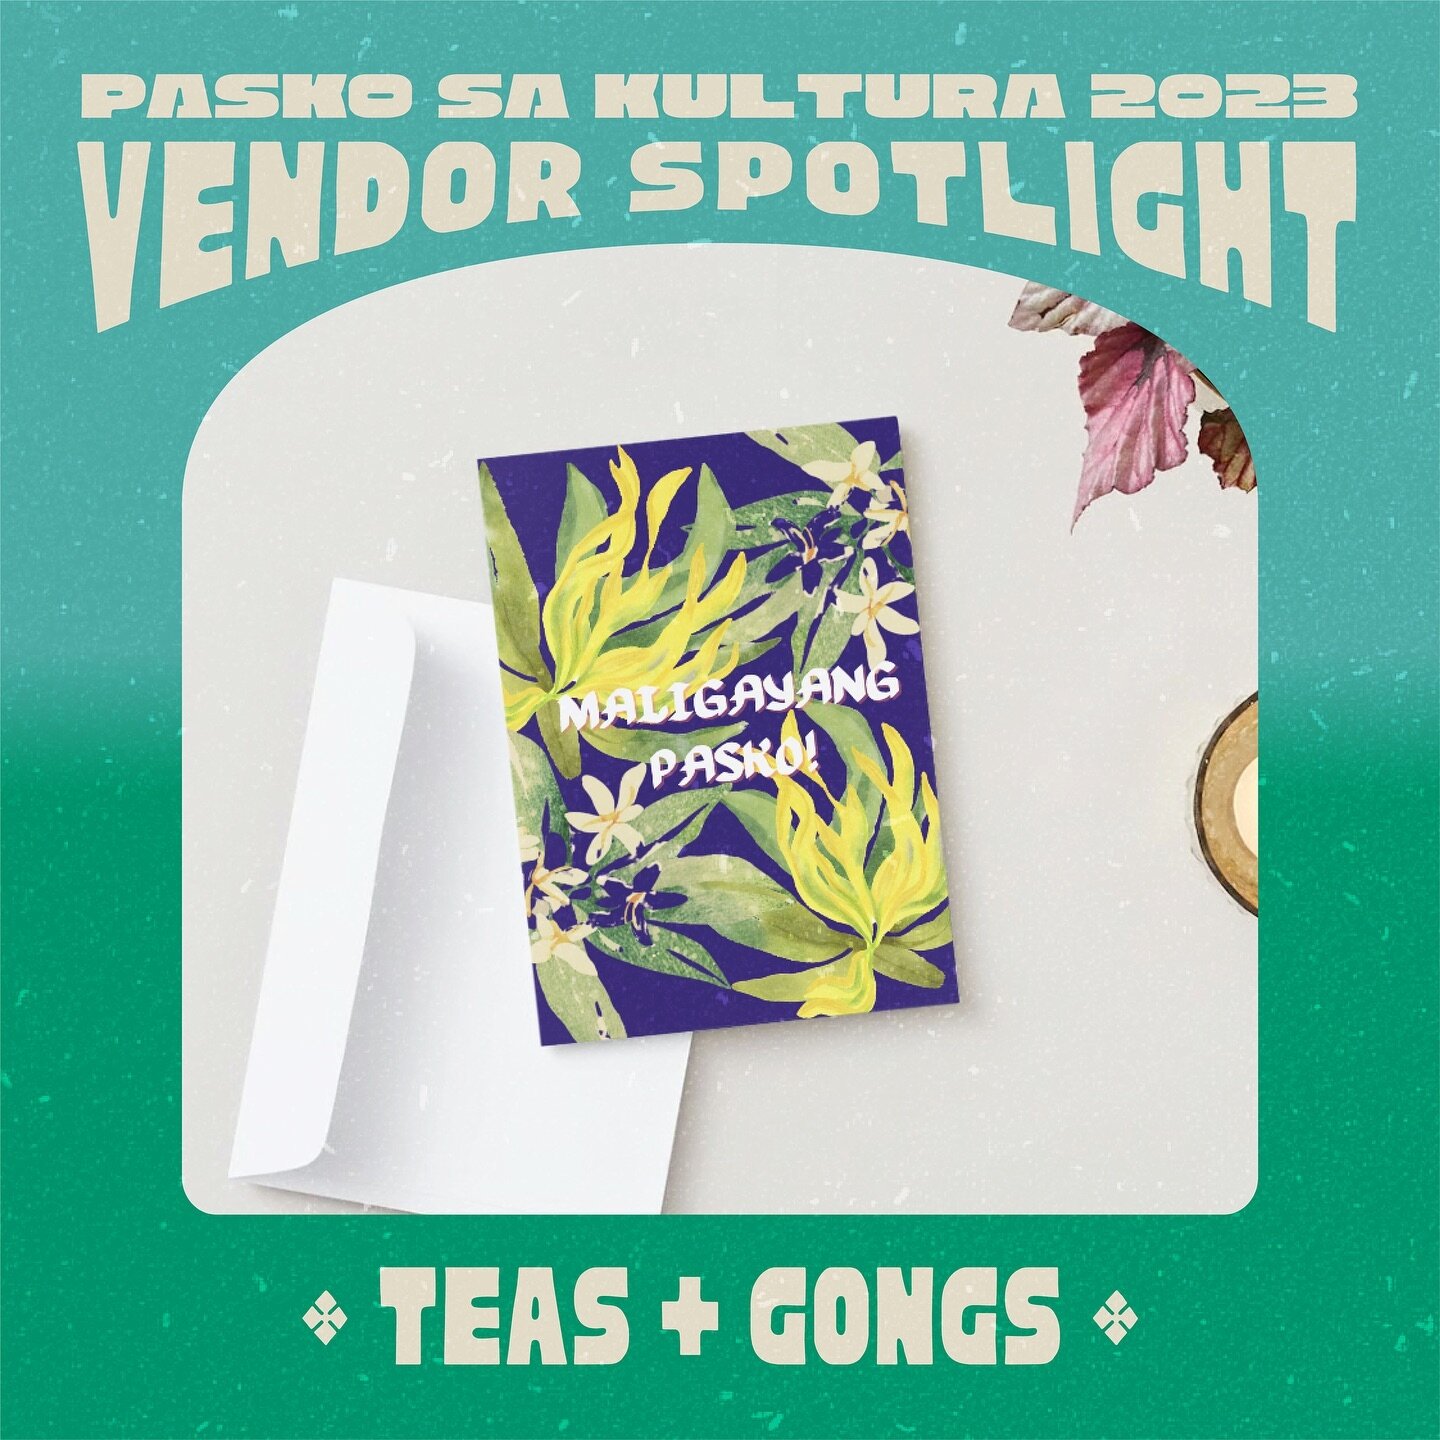 We&rsquo;re so excited to feature Teas + Gongs at this year&rsquo;s Pasko sa Kultura! ✨

Teas + Gongs with @jenmaramba and @l3xjunior will be offering a unique selection of:

🫖 Teas - Turtle Island Salabat, Malunggay/Peppermint
🩵 Lana (Blessing Oil